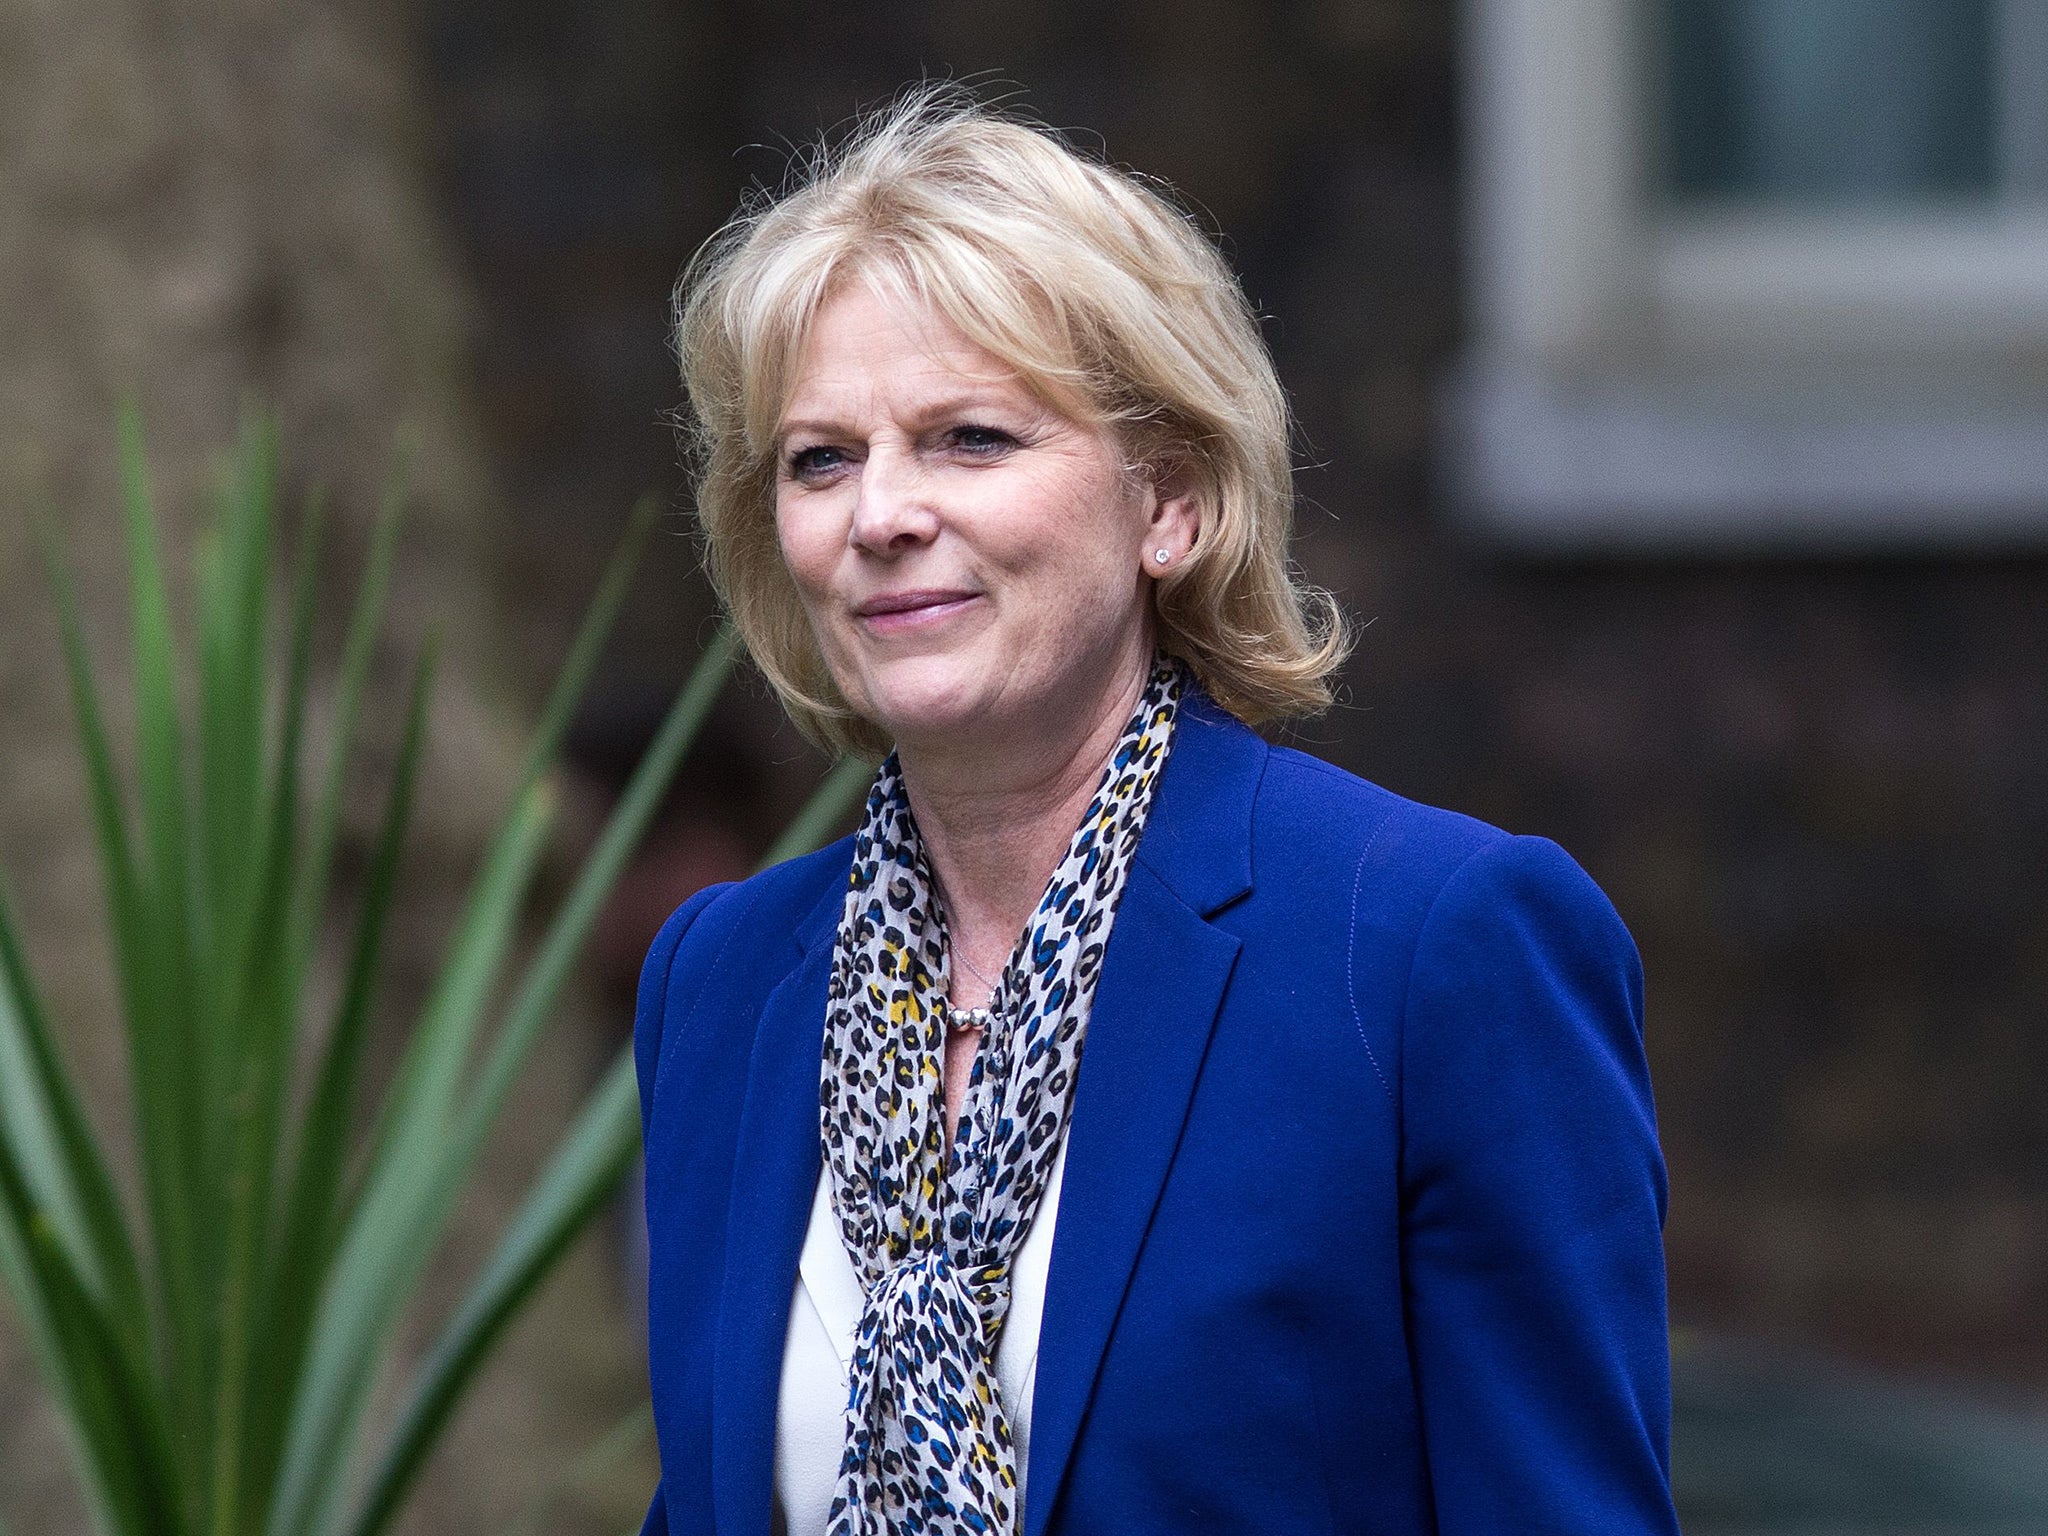 Small business minister Anna Soubry